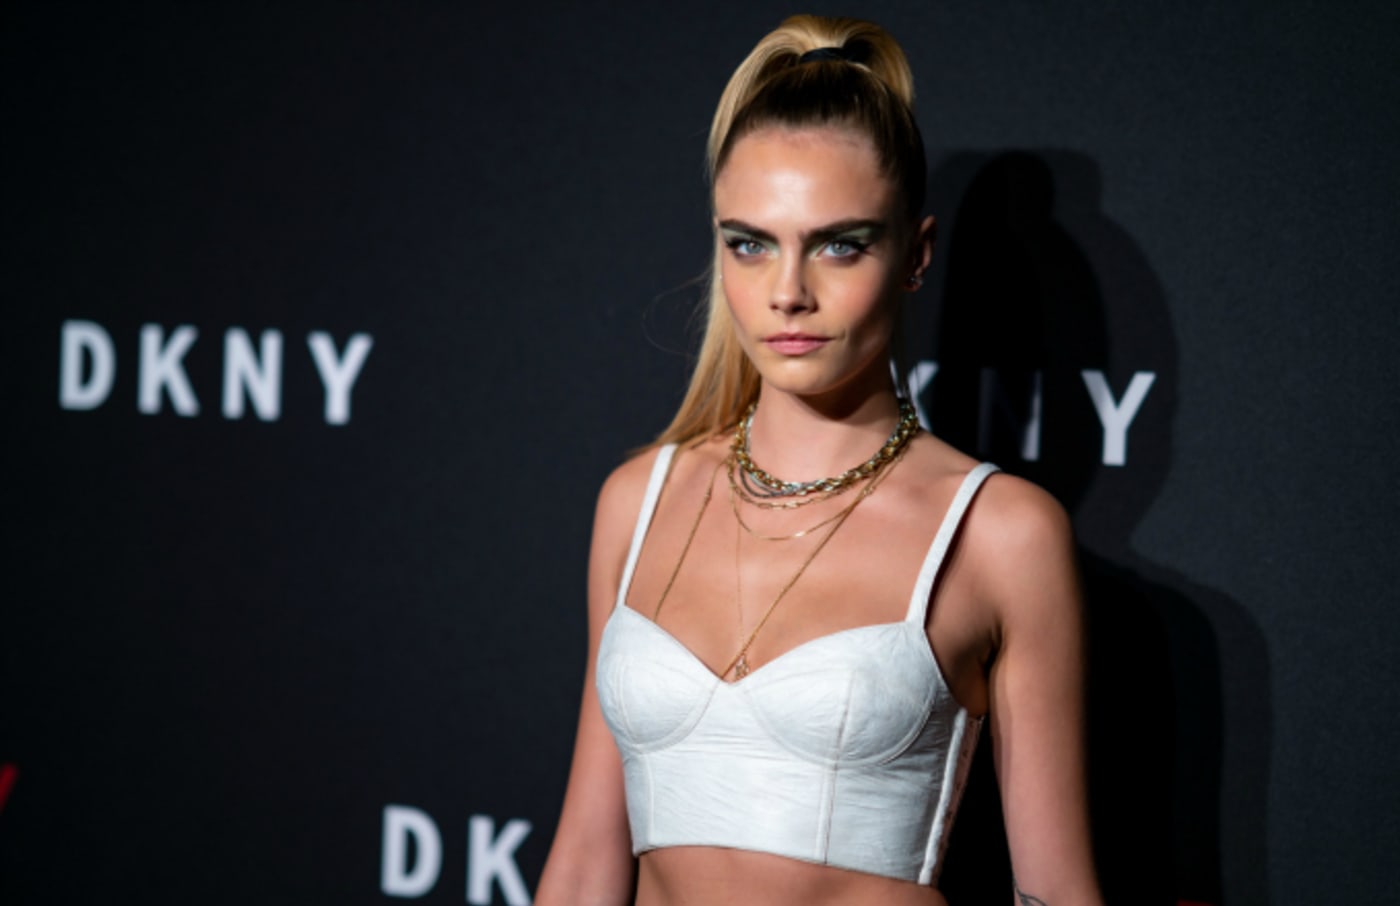 Cara Delevingne attends the DKNY 30th anniversary party